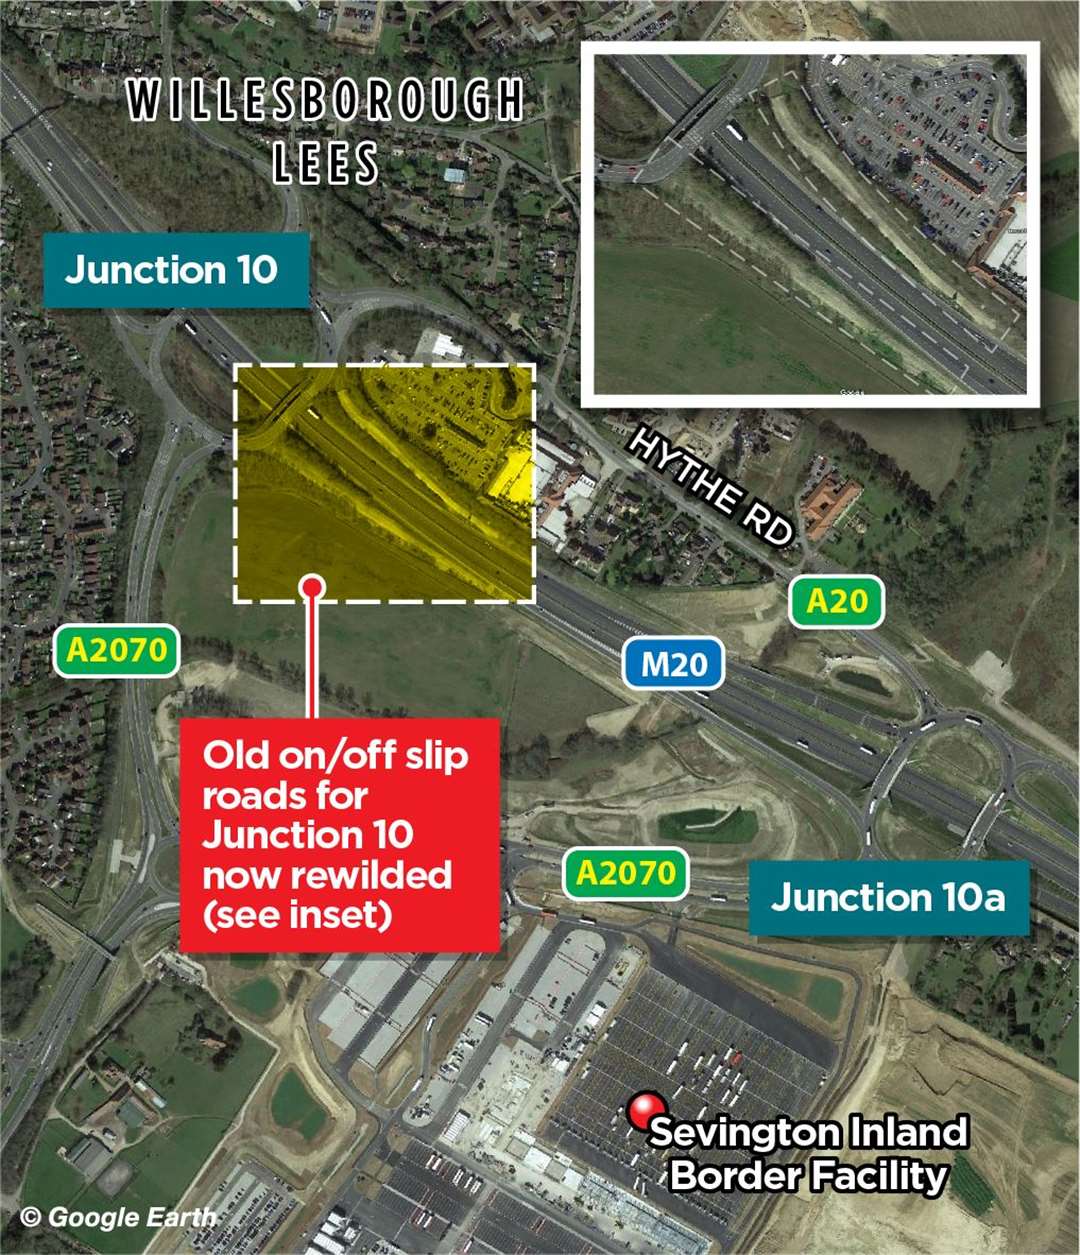 Junction 10a has been built just 700 metres south east of Junction 10